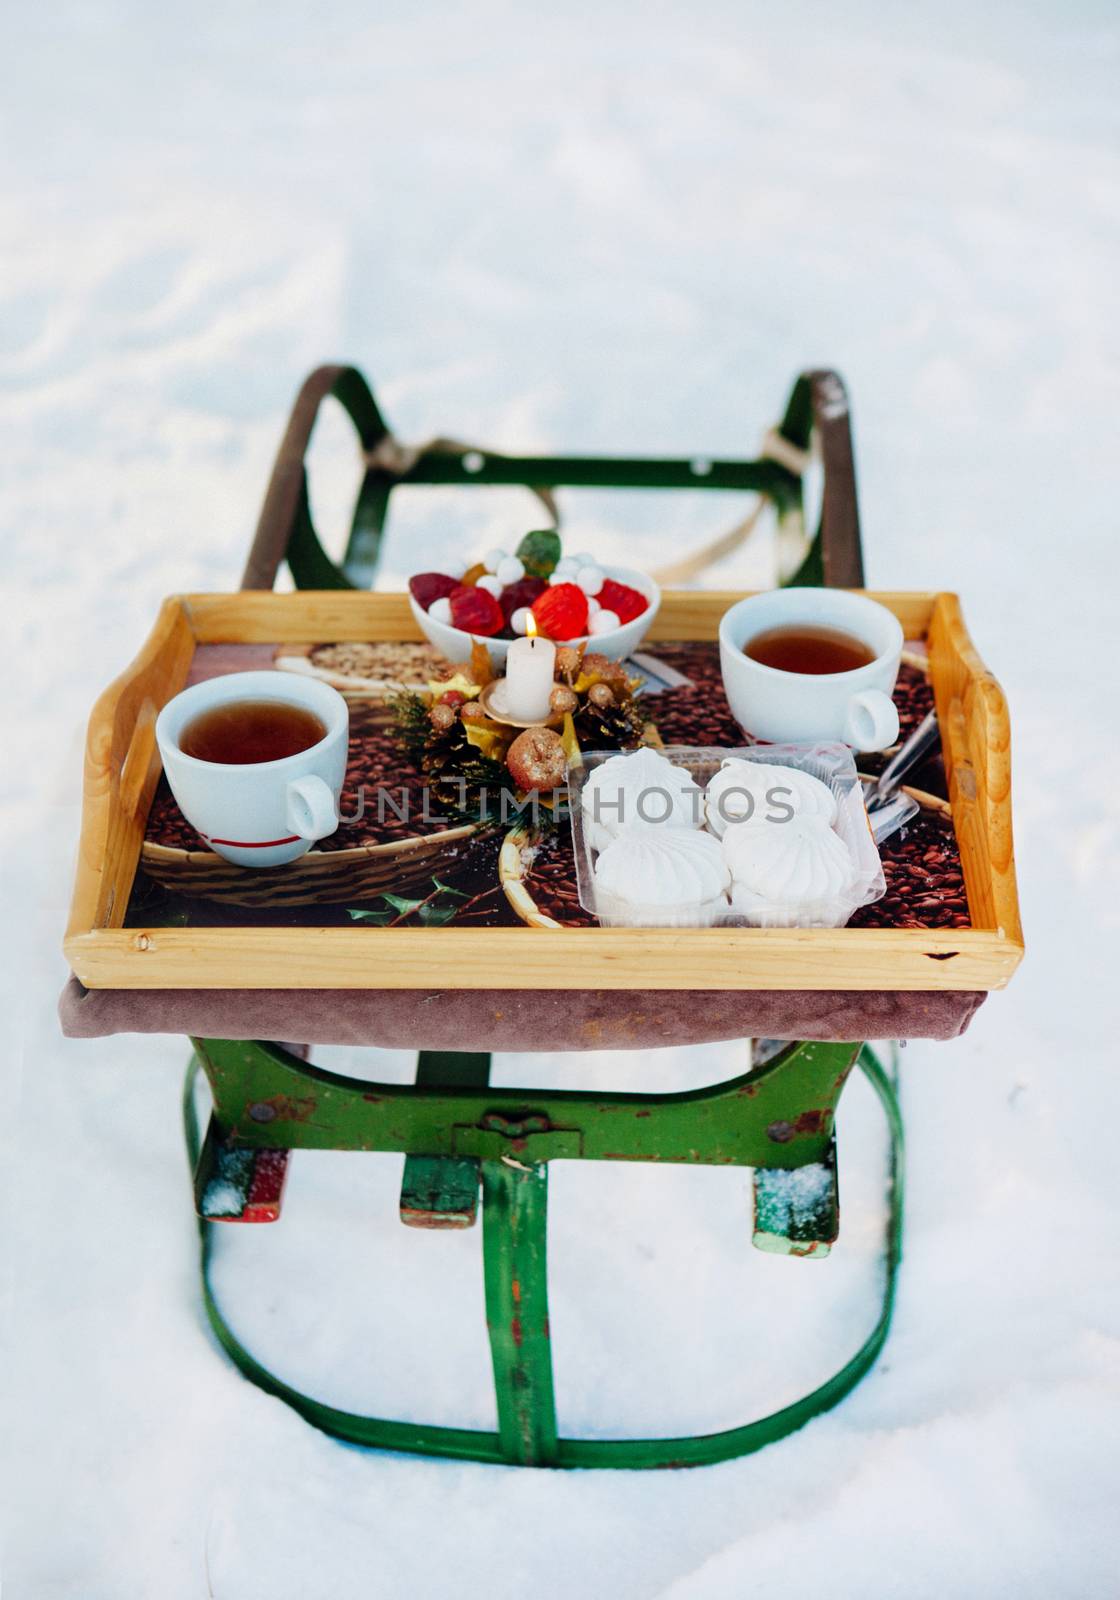 Romantic breakfast in the snow. Winter Vintage Sledge. Coffee, marshmallows, and other sweets by sermax55